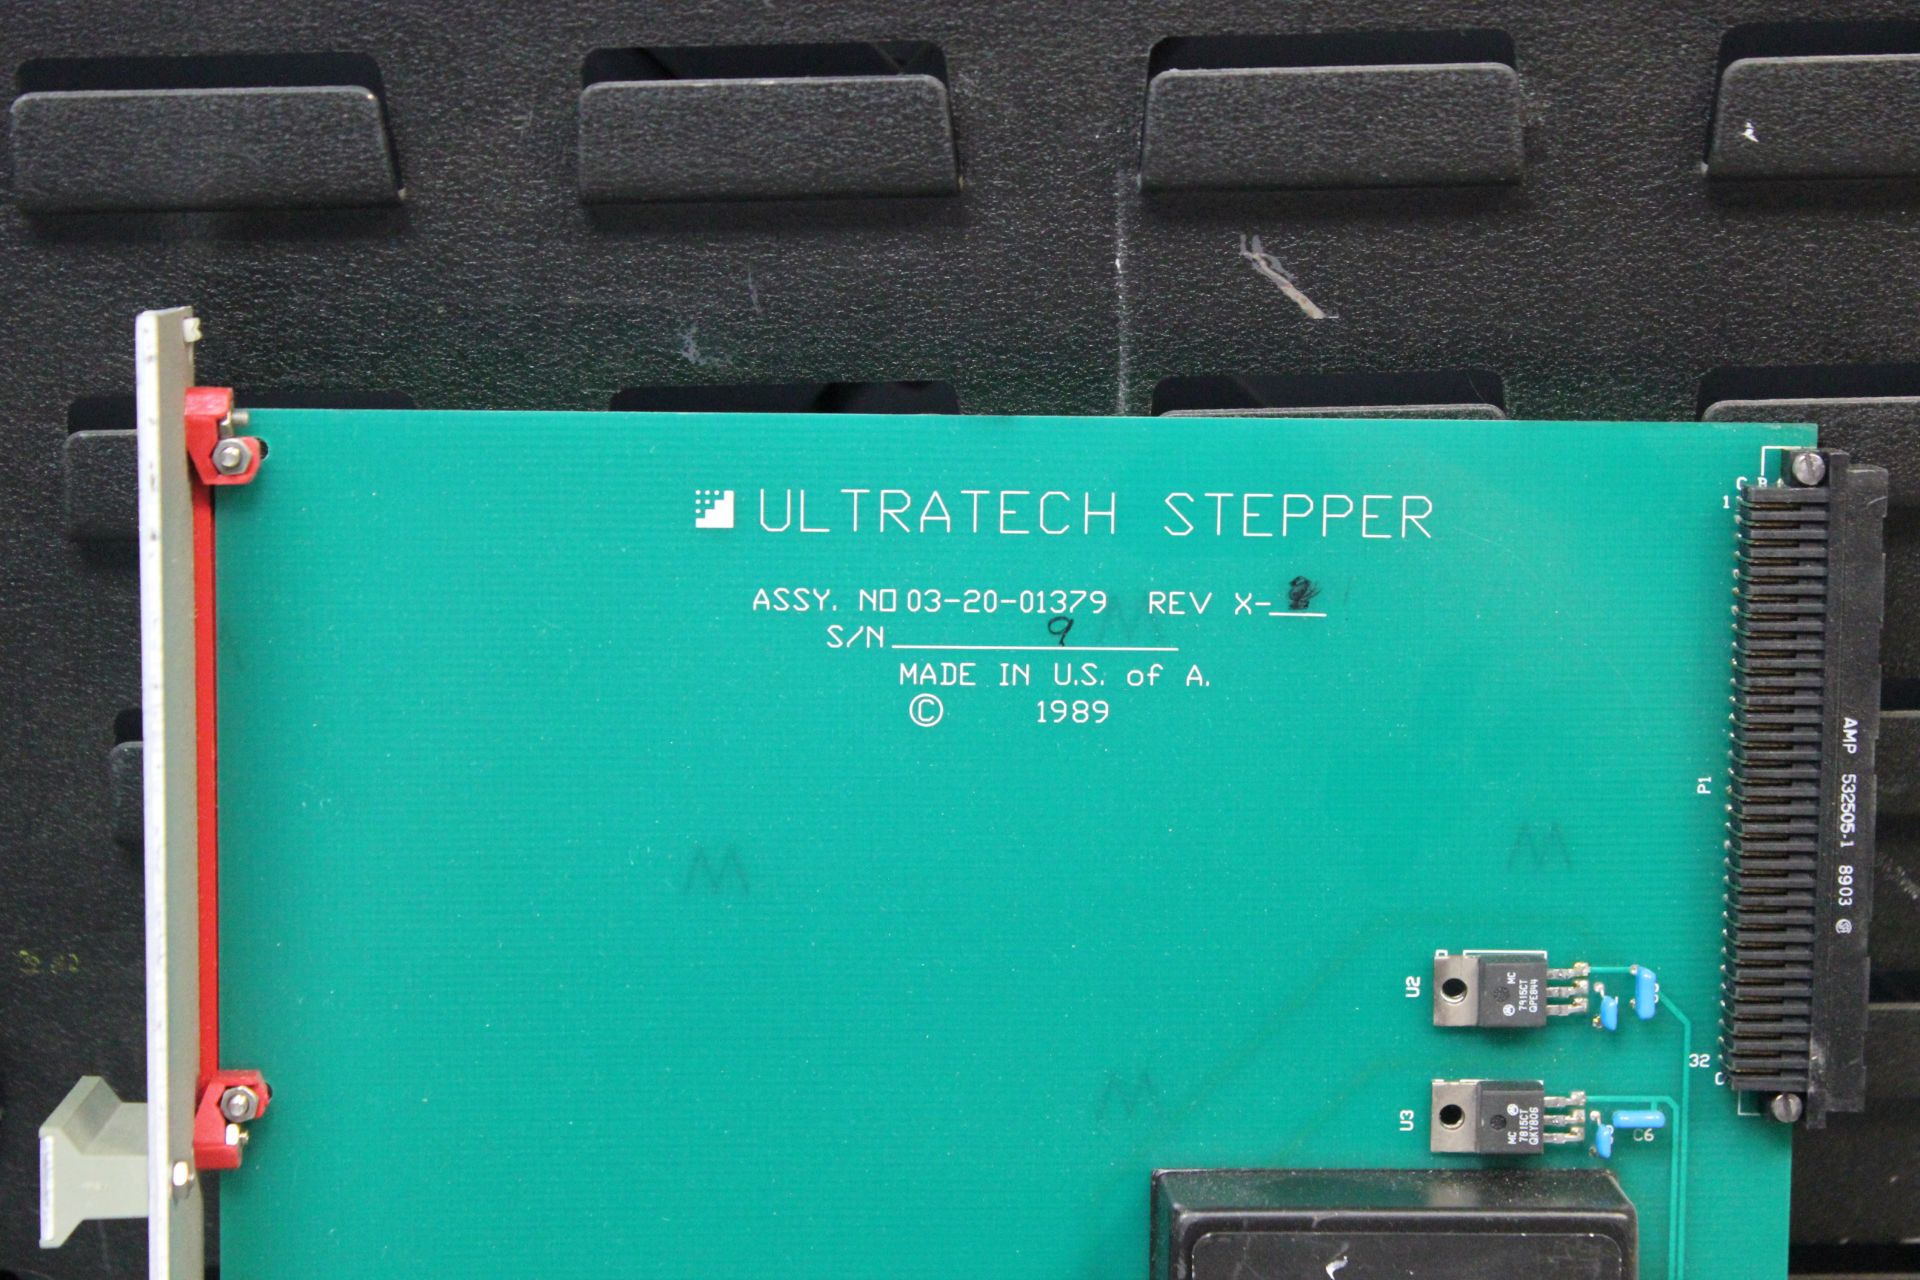 ULTRATECH STEPPER COMPUTER PRODUCTS - Image 2 of 3